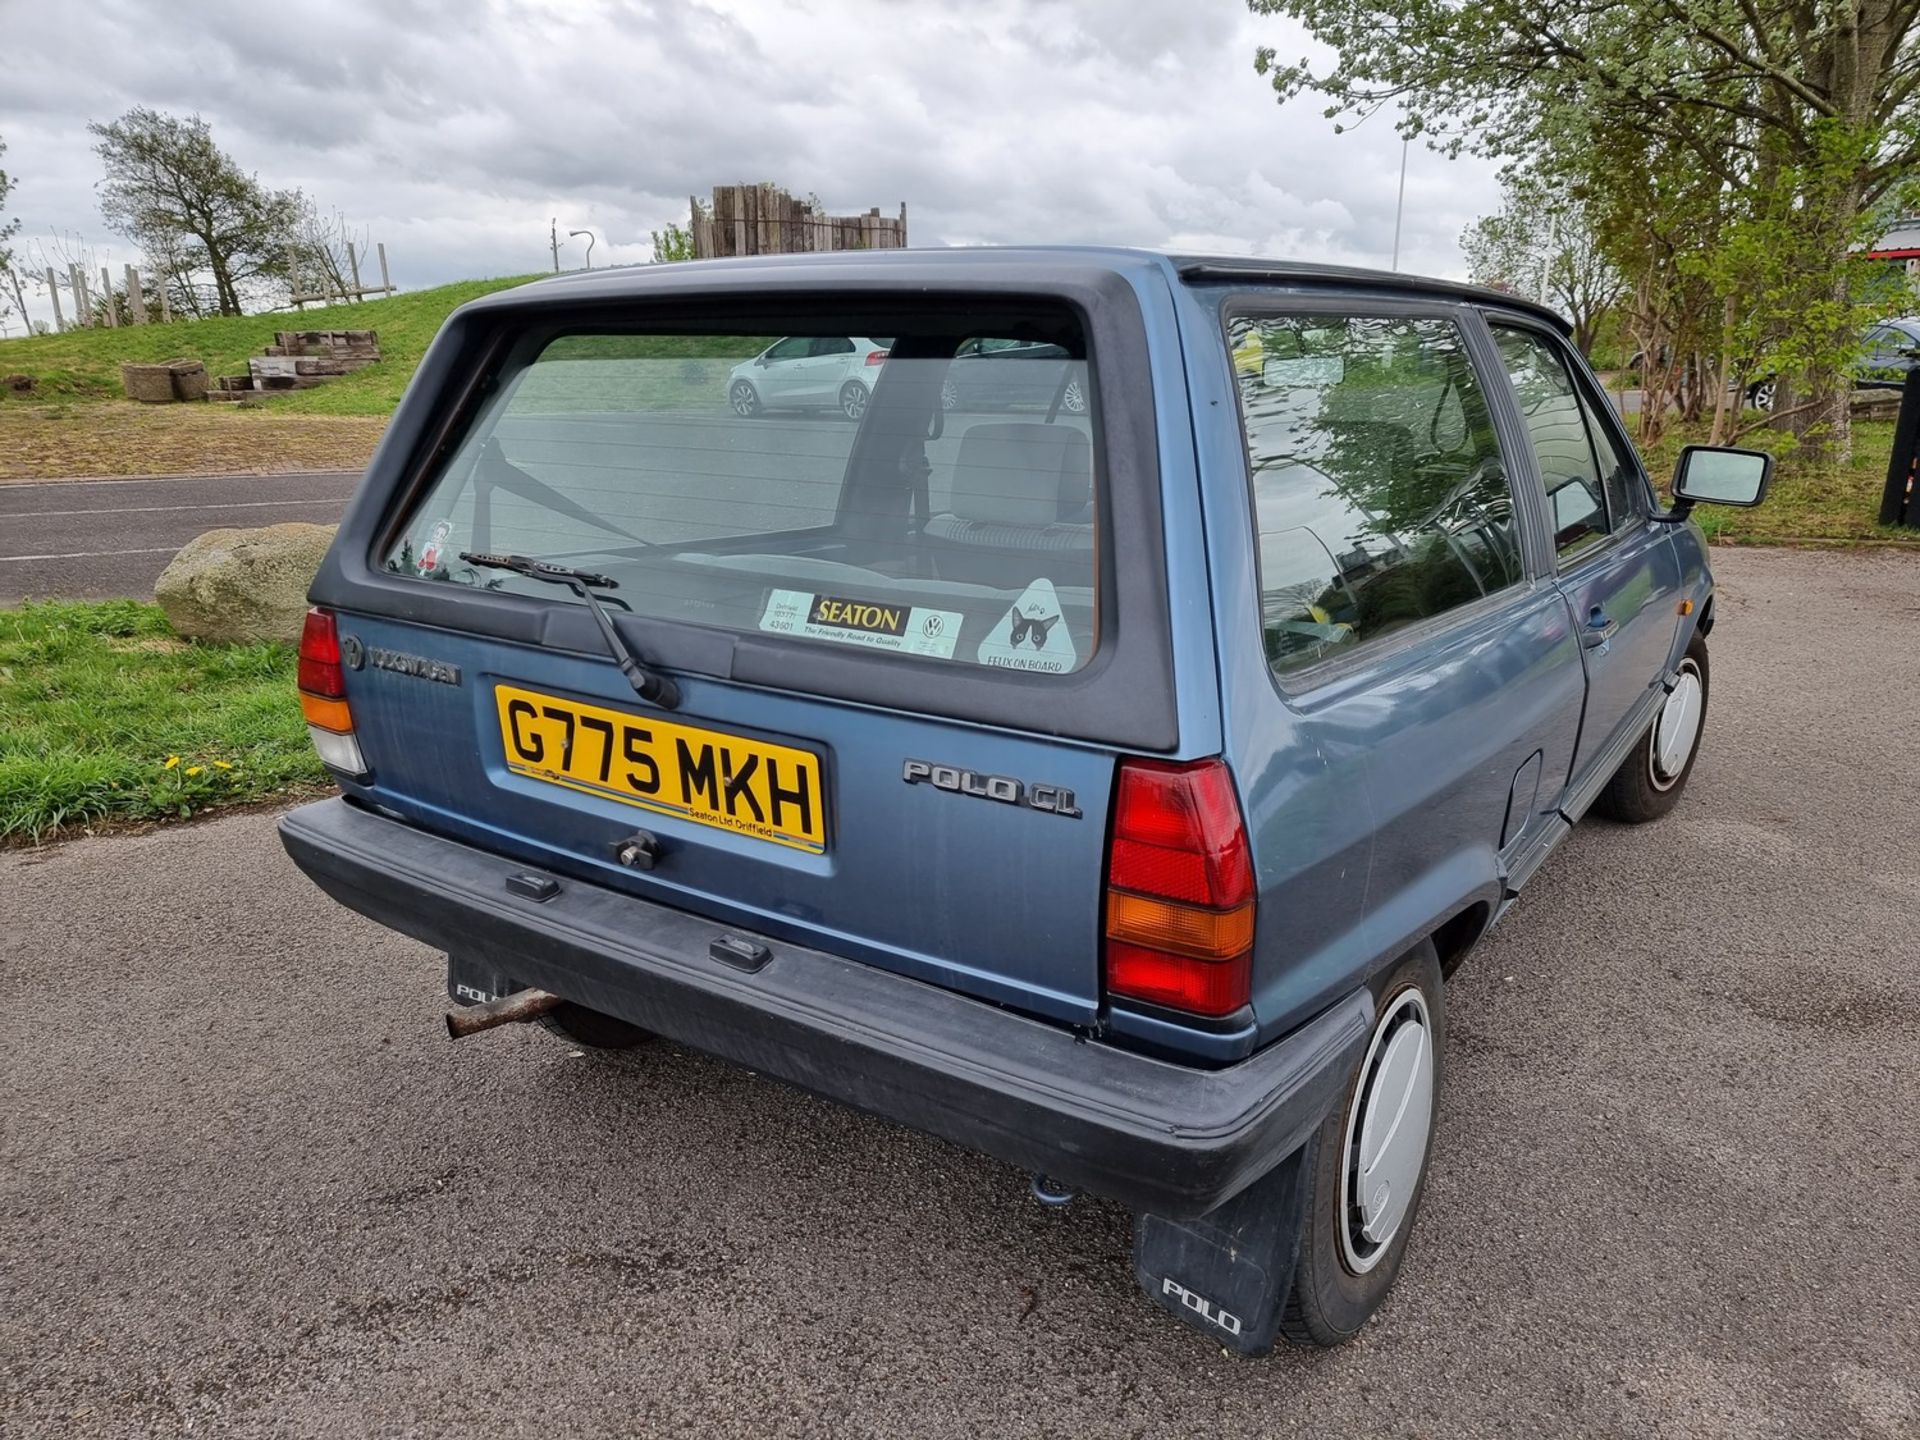 1989 VW Polo Mk2, 1272cc. Registration number G775 MKH. Chassis number WVWZZZ80ZKW168973. Engine - Image 3 of 16